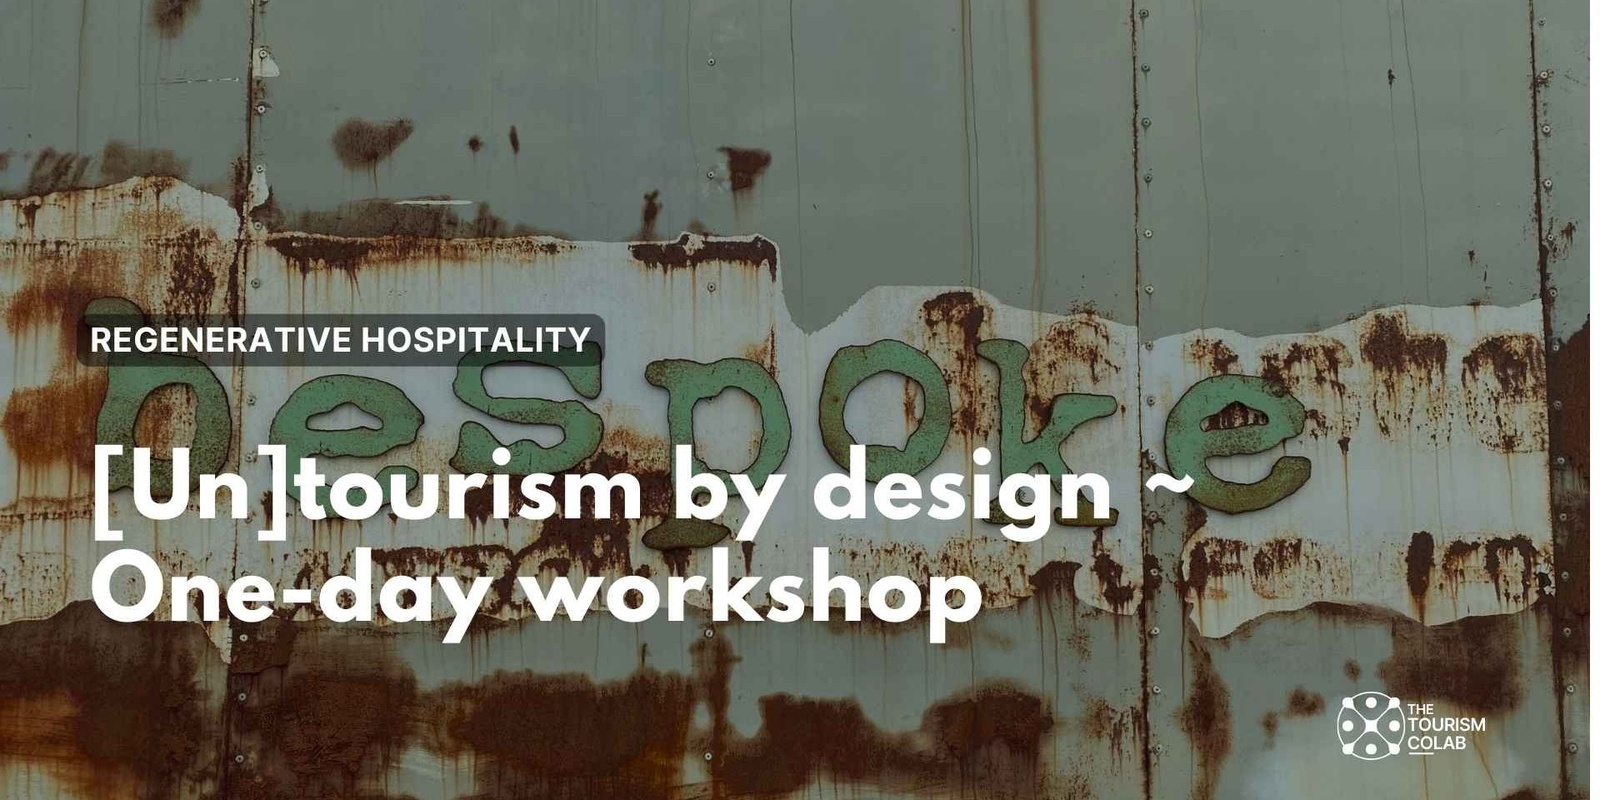 Banner image for [Un]tourism by design one day workshop